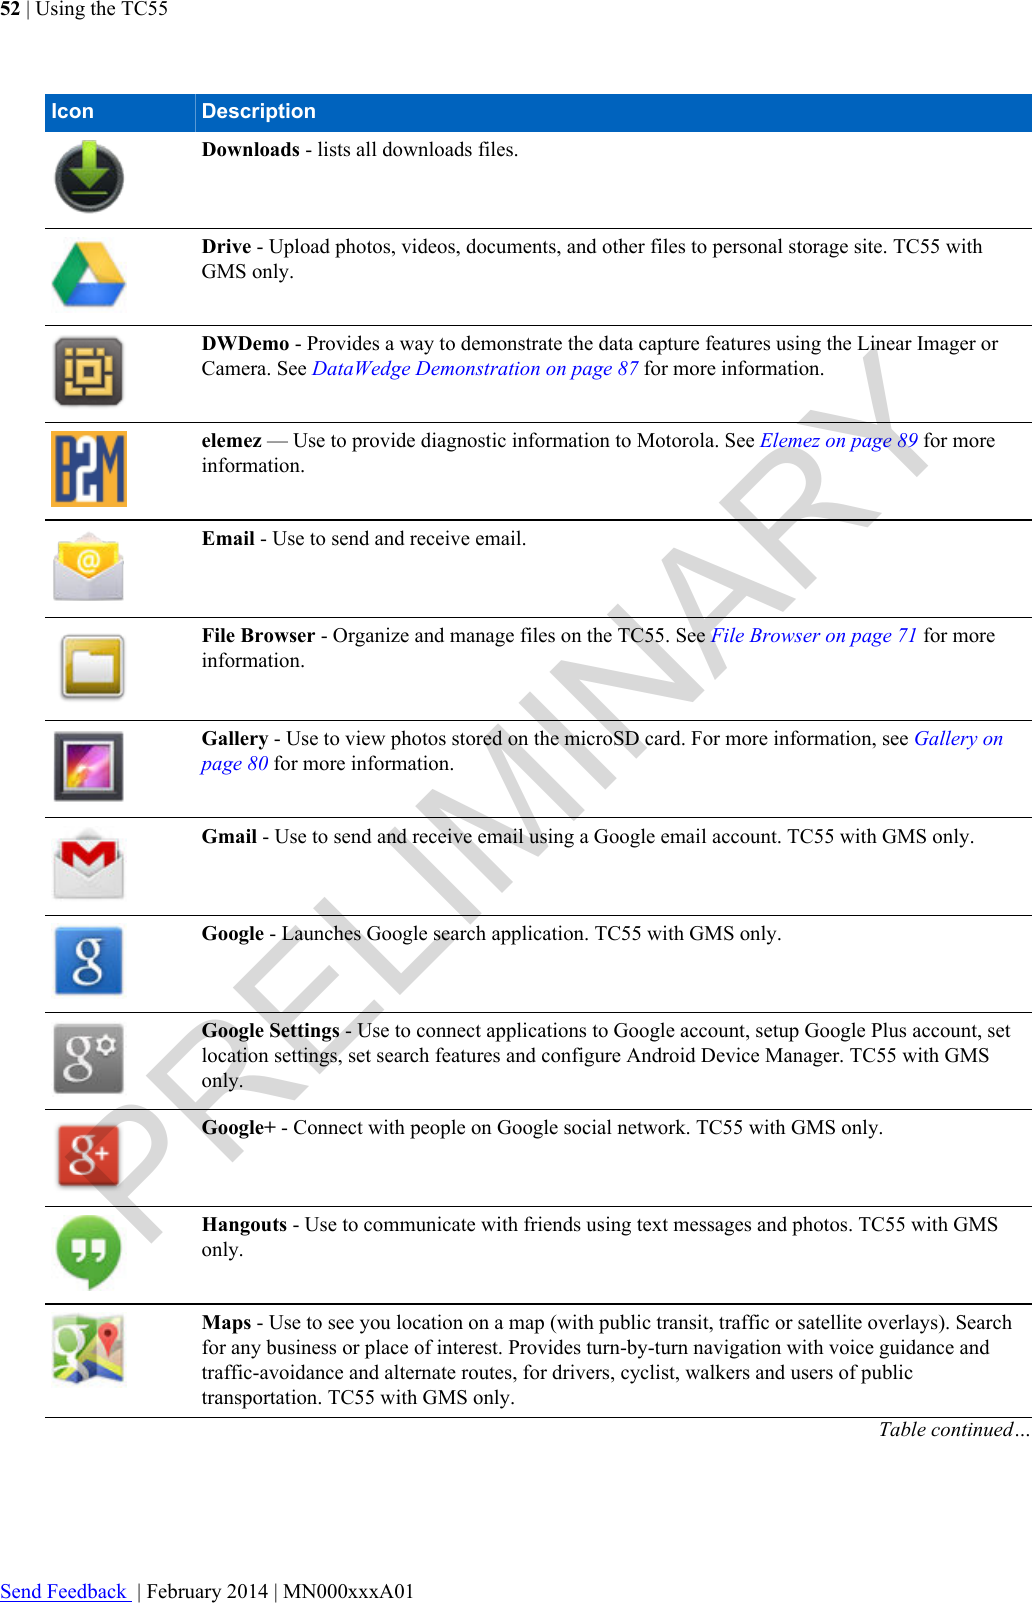 Icon DescriptionDownloads - lists all downloads files.Drive - Upload photos, videos, documents, and other files to personal storage site. TC55 withGMS only.DWDemo - Provides a way to demonstrate the data capture features using the Linear Imager orCamera. See DataWedge Demonstration on page 87 for more information.elemez — Use to provide diagnostic information to Motorola. See Elemez on page 89 for moreinformation.Email - Use to send and receive email.File Browser - Organize and manage files on the TC55. See File Browser on page 71 for moreinformation.Gallery - Use to view photos stored on the microSD card. For more information, see Gallery onpage 80 for more information.Gmail - Use to send and receive email using a Google email account. TC55 with GMS only.Google - Launches Google search application. TC55 with GMS only.Google Settings - Use to connect applications to Google account, setup Google Plus account, setlocation settings, set search features and configure Android Device Manager. TC55 with GMSonly.Google+ - Connect with people on Google social network. TC55 with GMS only.Hangouts - Use to communicate with friends using text messages and photos. TC55 with GMSonly.Maps - Use to see you location on a map (with public transit, traffic or satellite overlays). Searchfor any business or place of interest. Provides turn-by-turn navigation with voice guidance andtraffic-avoidance and alternate routes, for drivers, cyclist, walkers and users of publictransportation. TC55 with GMS only.Table continued…52 | Using the TC55Send Feedback  | February 2014 | MN000xxxA01PRELIMINARY